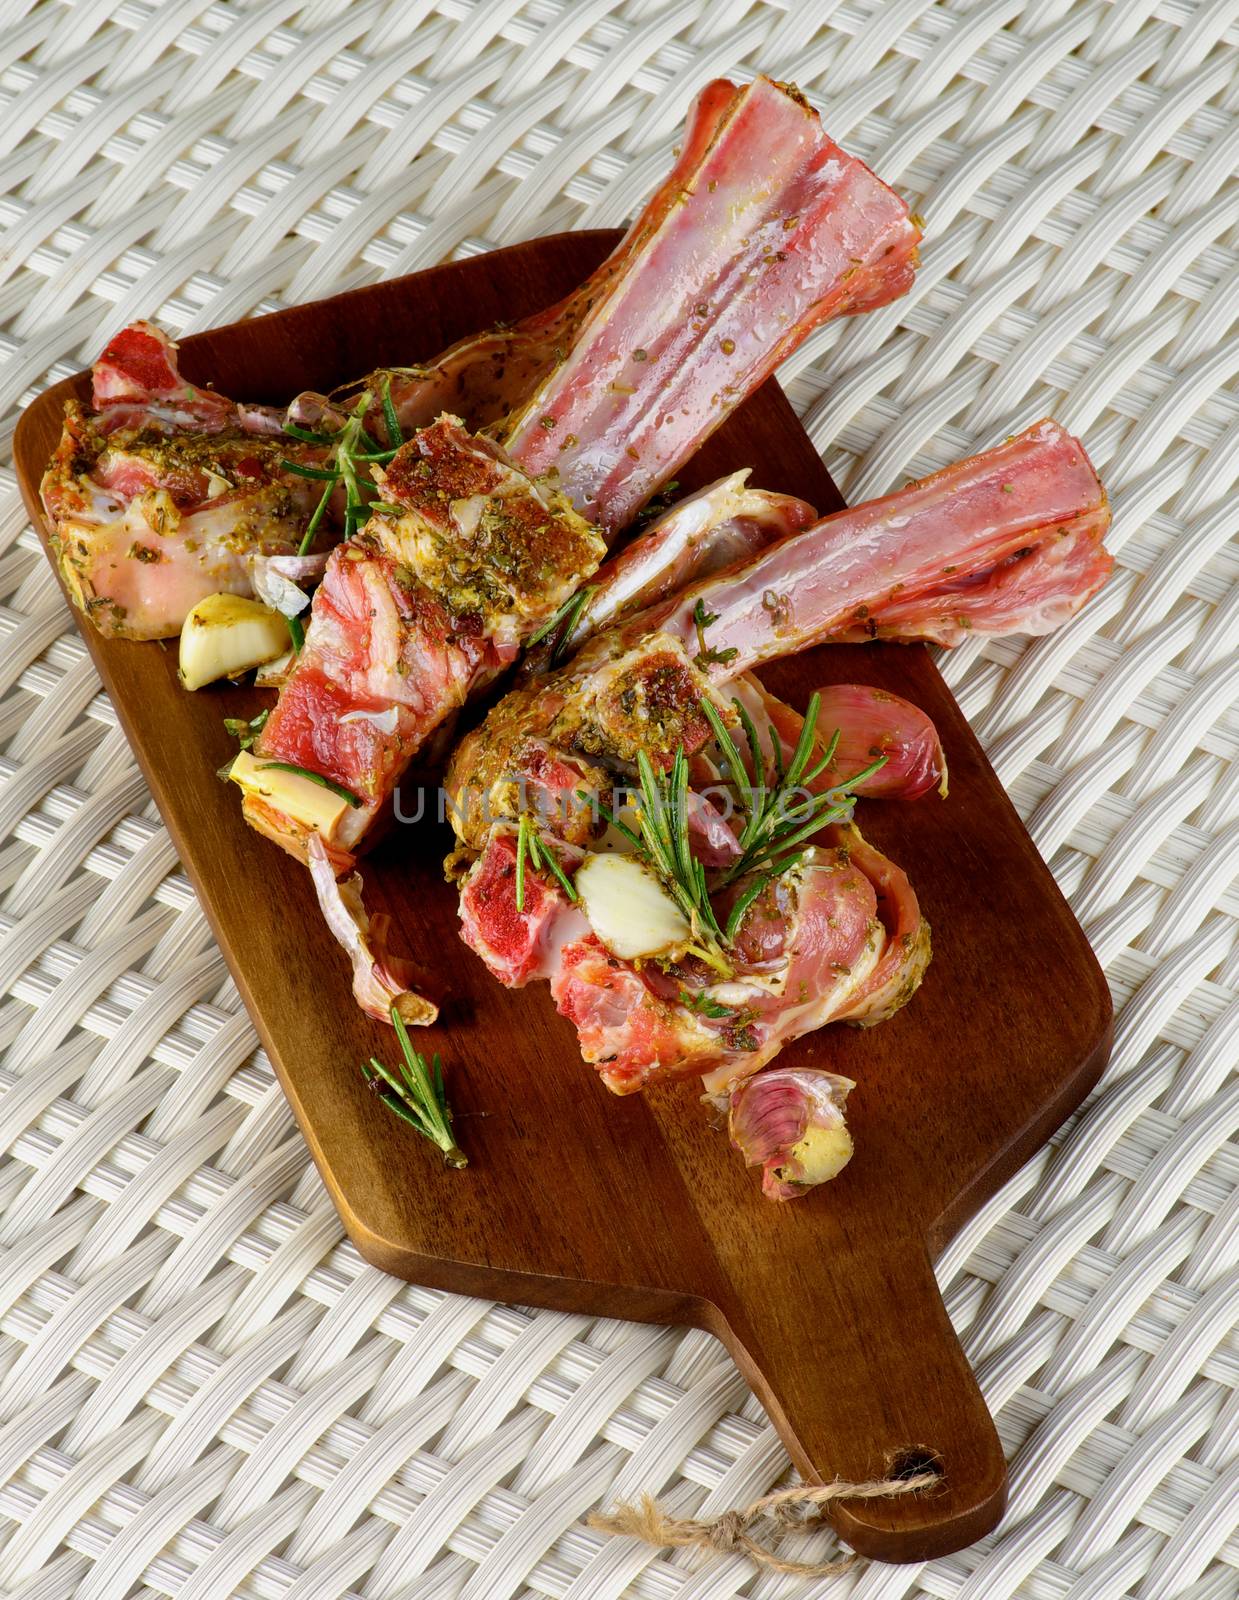 Delicious Raw Lamb Ribs in Marinade of Herbs and Spices with Rosemary and Garlic closeup on Wooden Cutting Board closeup on Wicker background